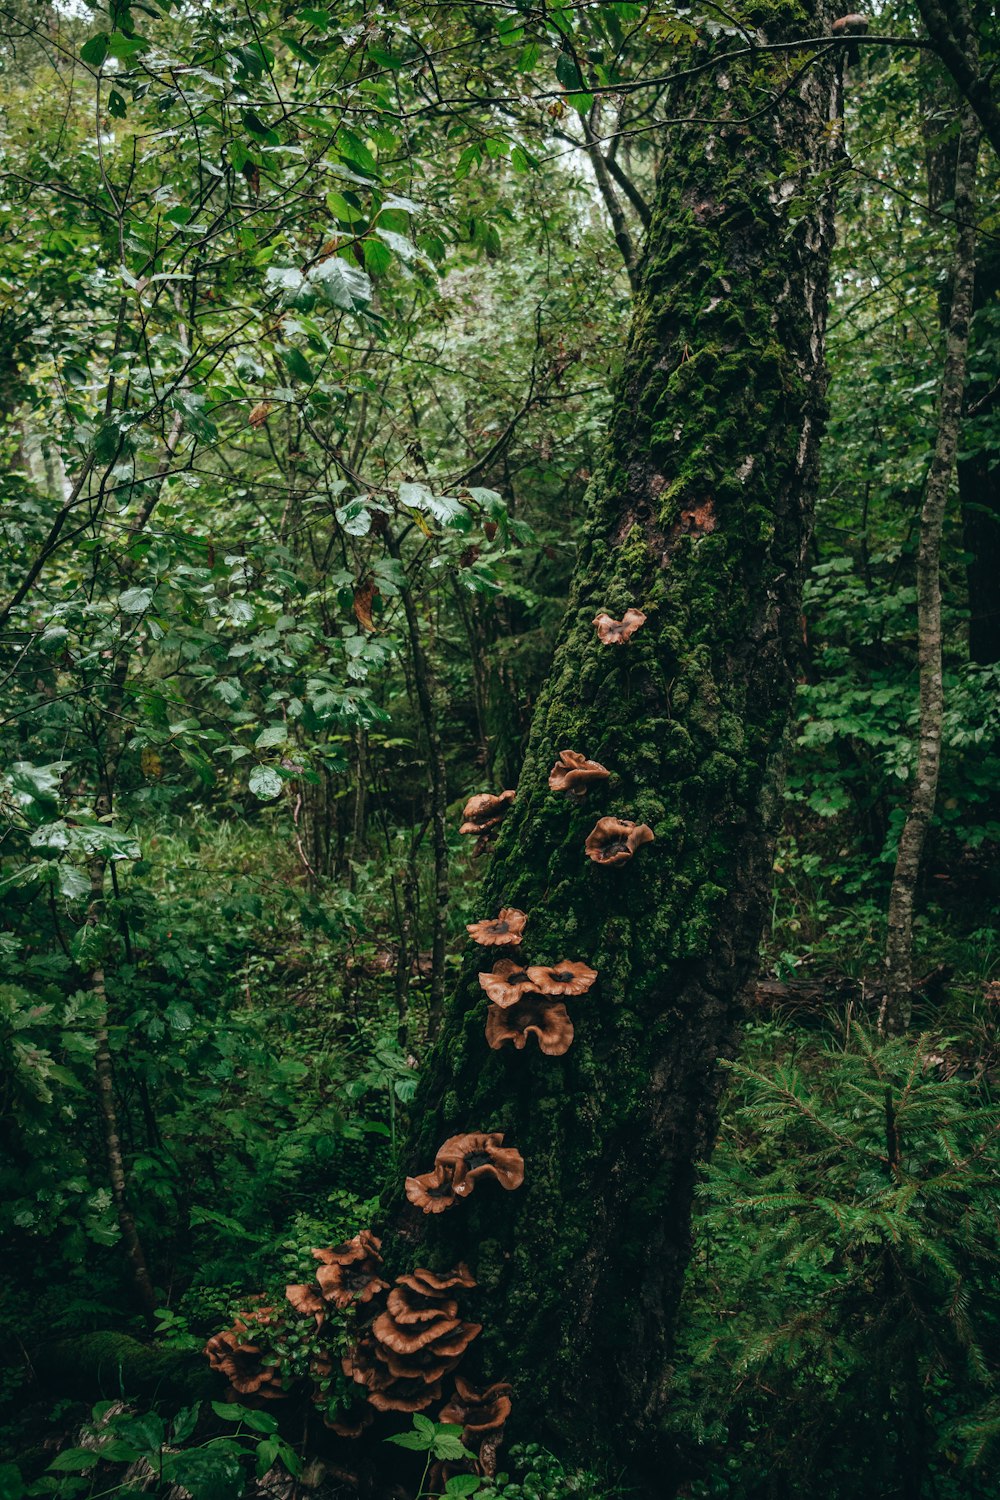 mushrooms growing on a tree in the forest